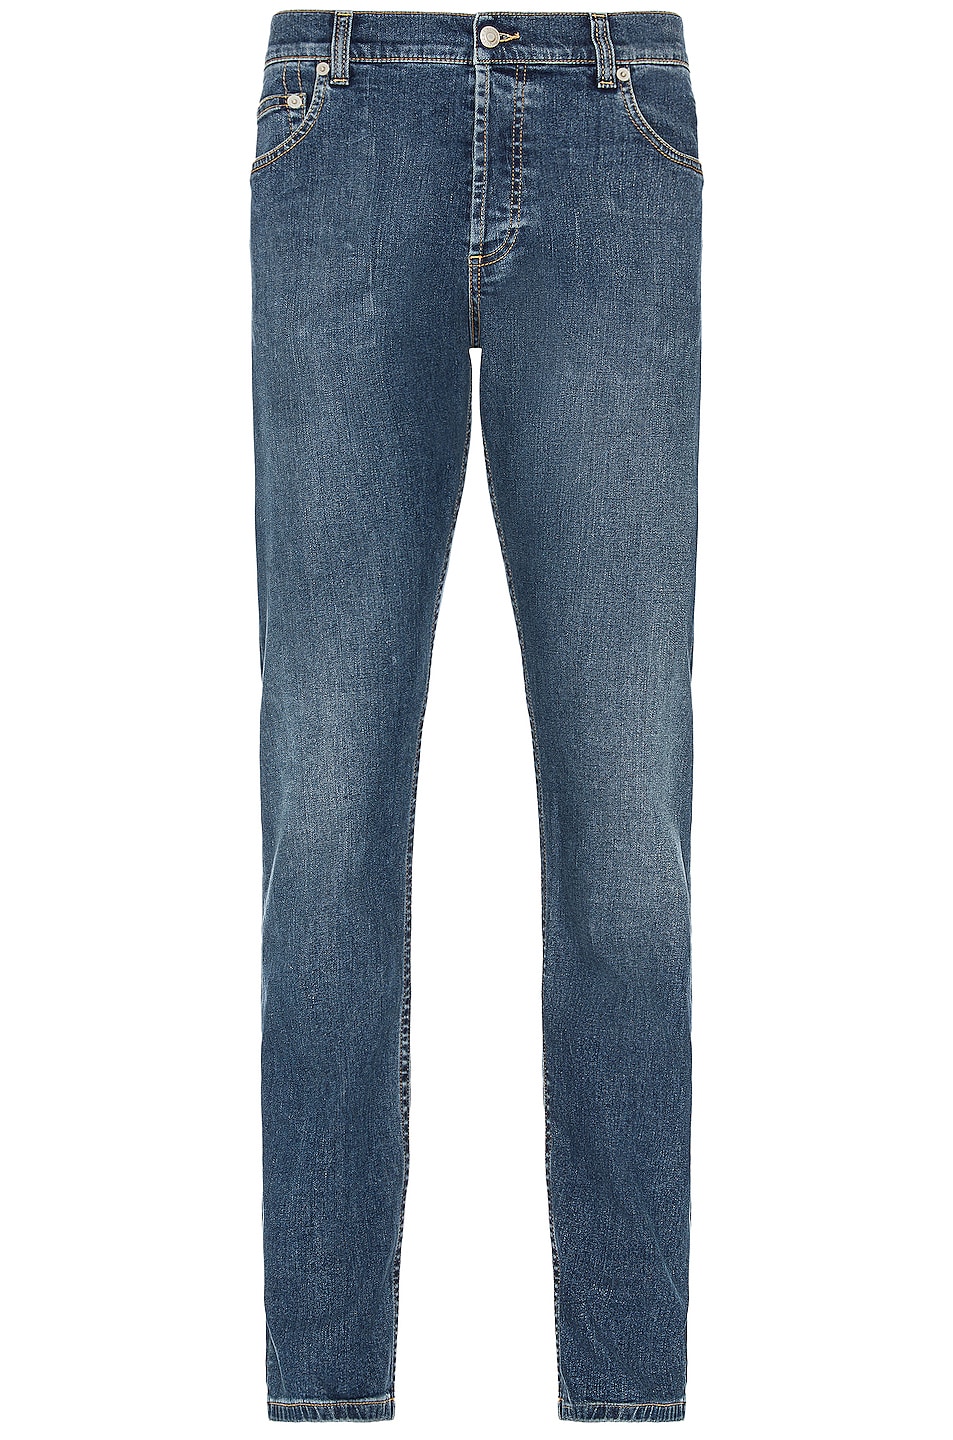 Image 1 of Alexander McQueen Denim Pant in Blue Washed